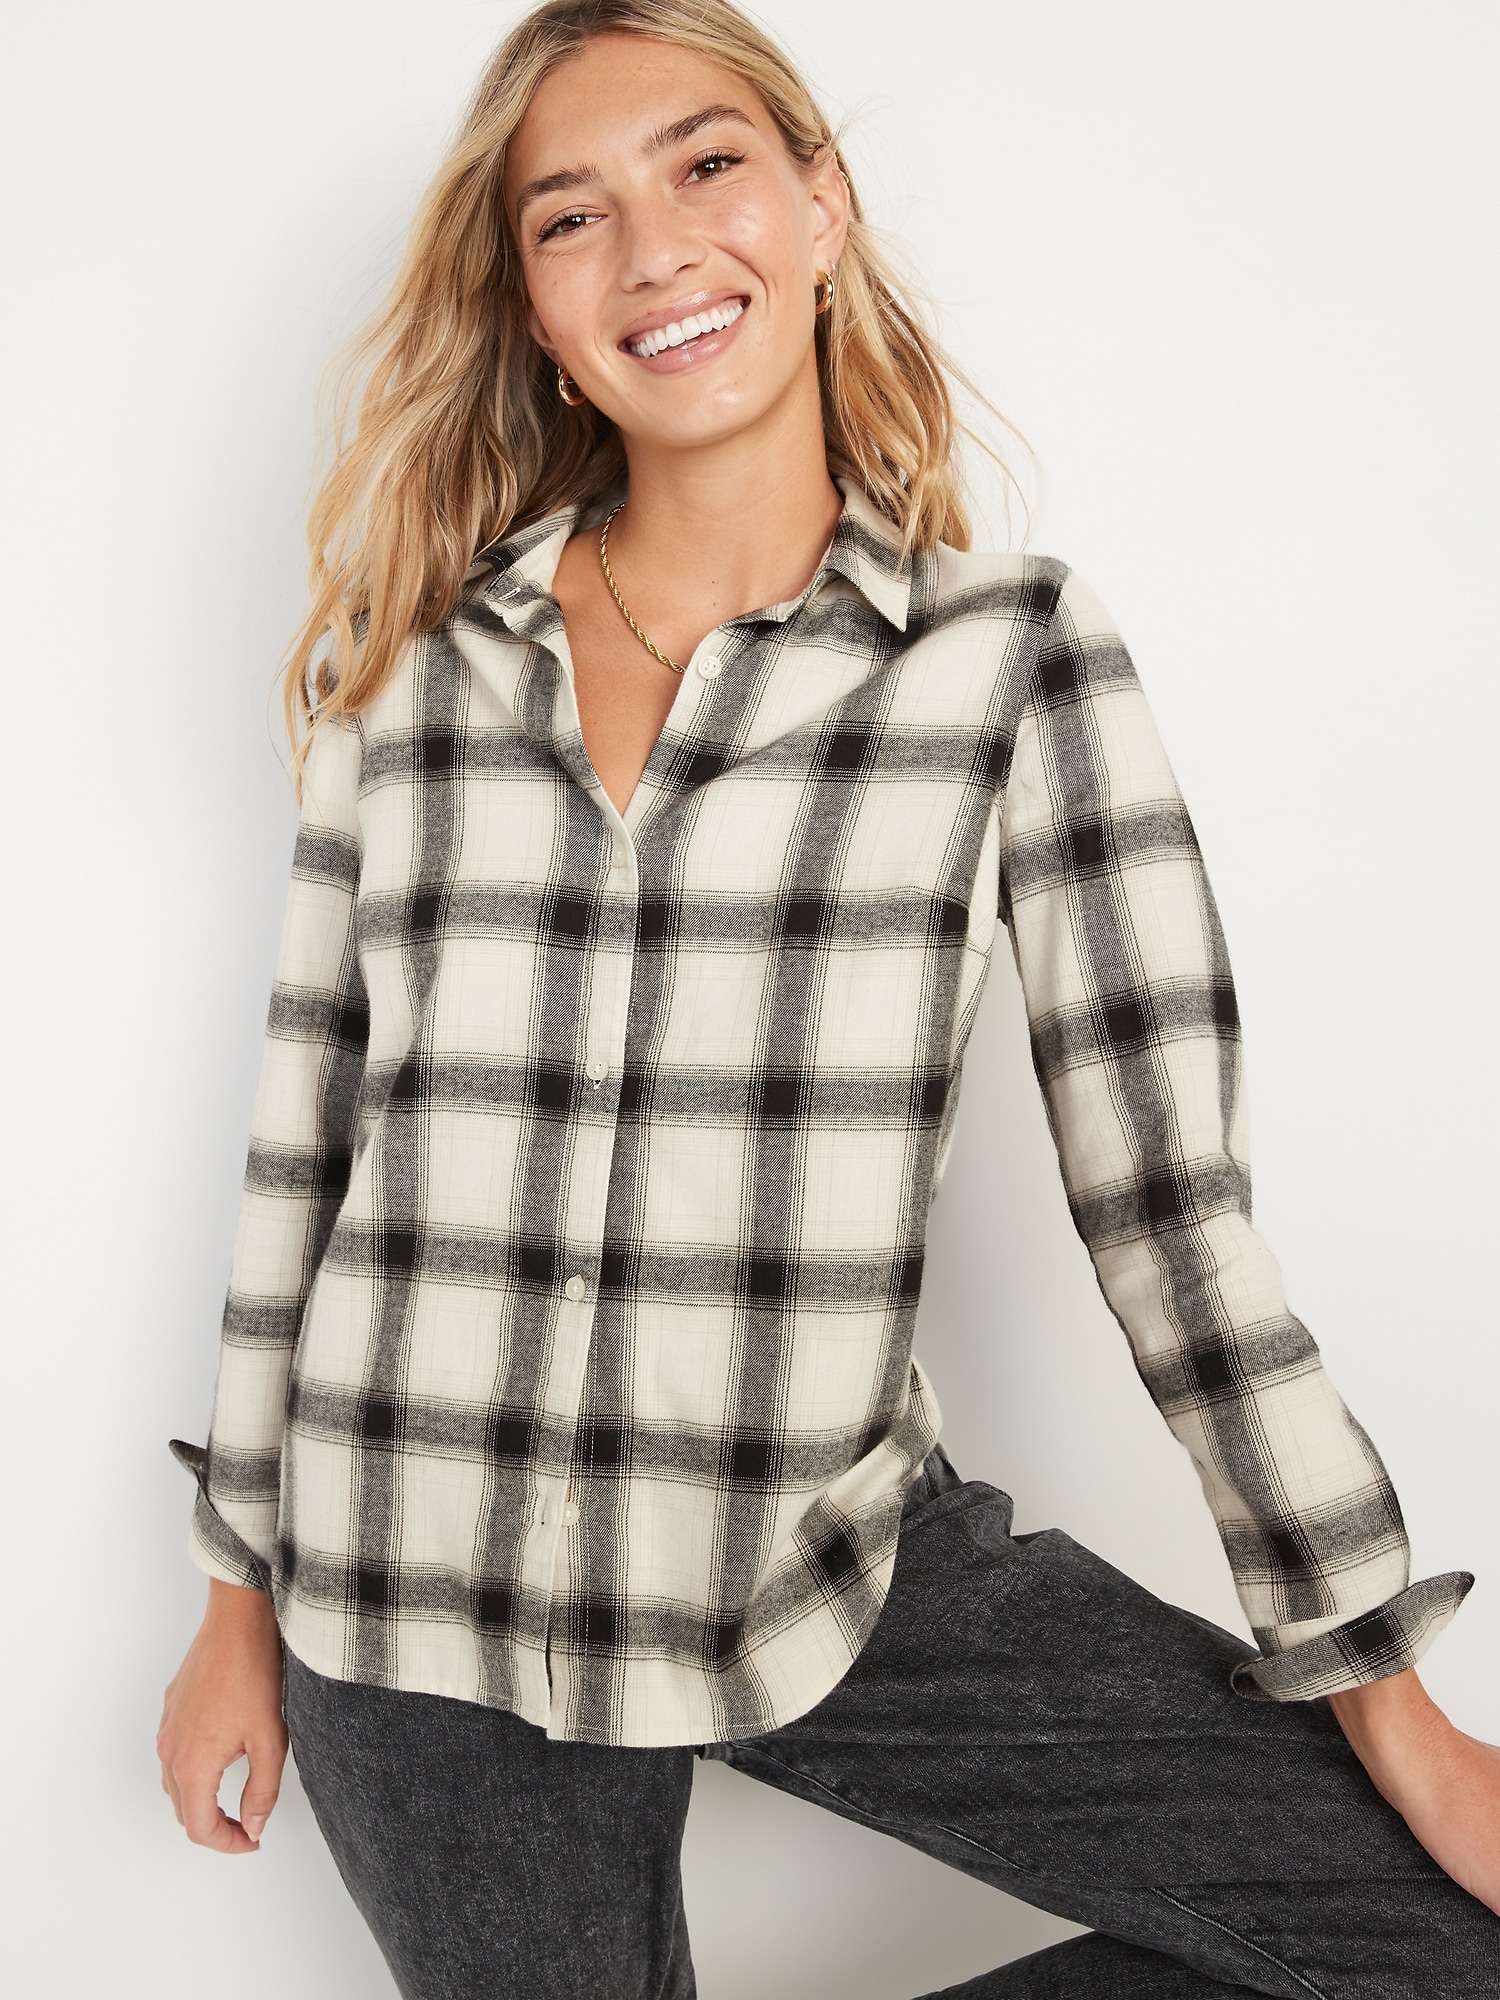 Long-Sleeve Plaid Flannel Shirt | Old Navy